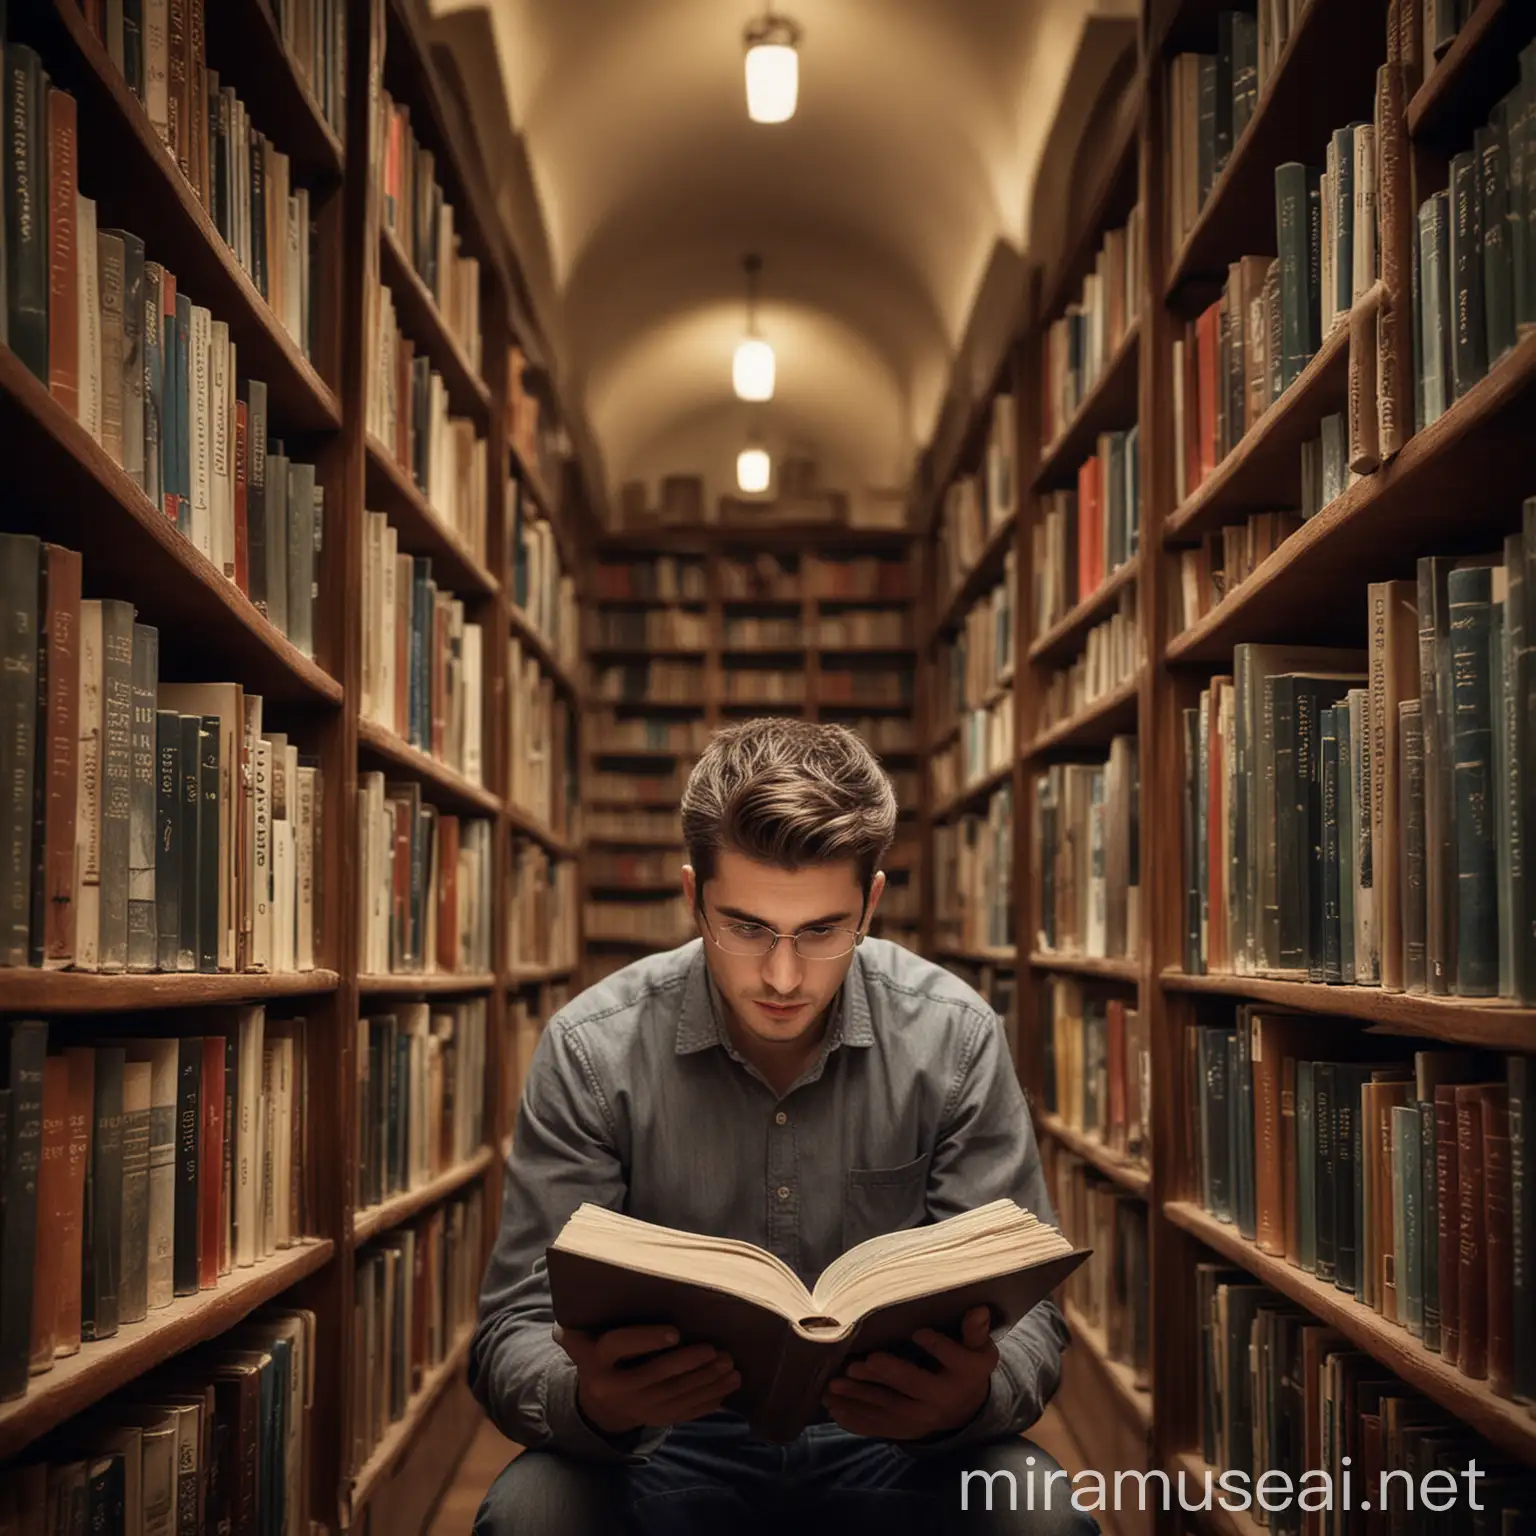 create an image of a reader in the library interior, he reads very concentratedly, he has several literature books.
